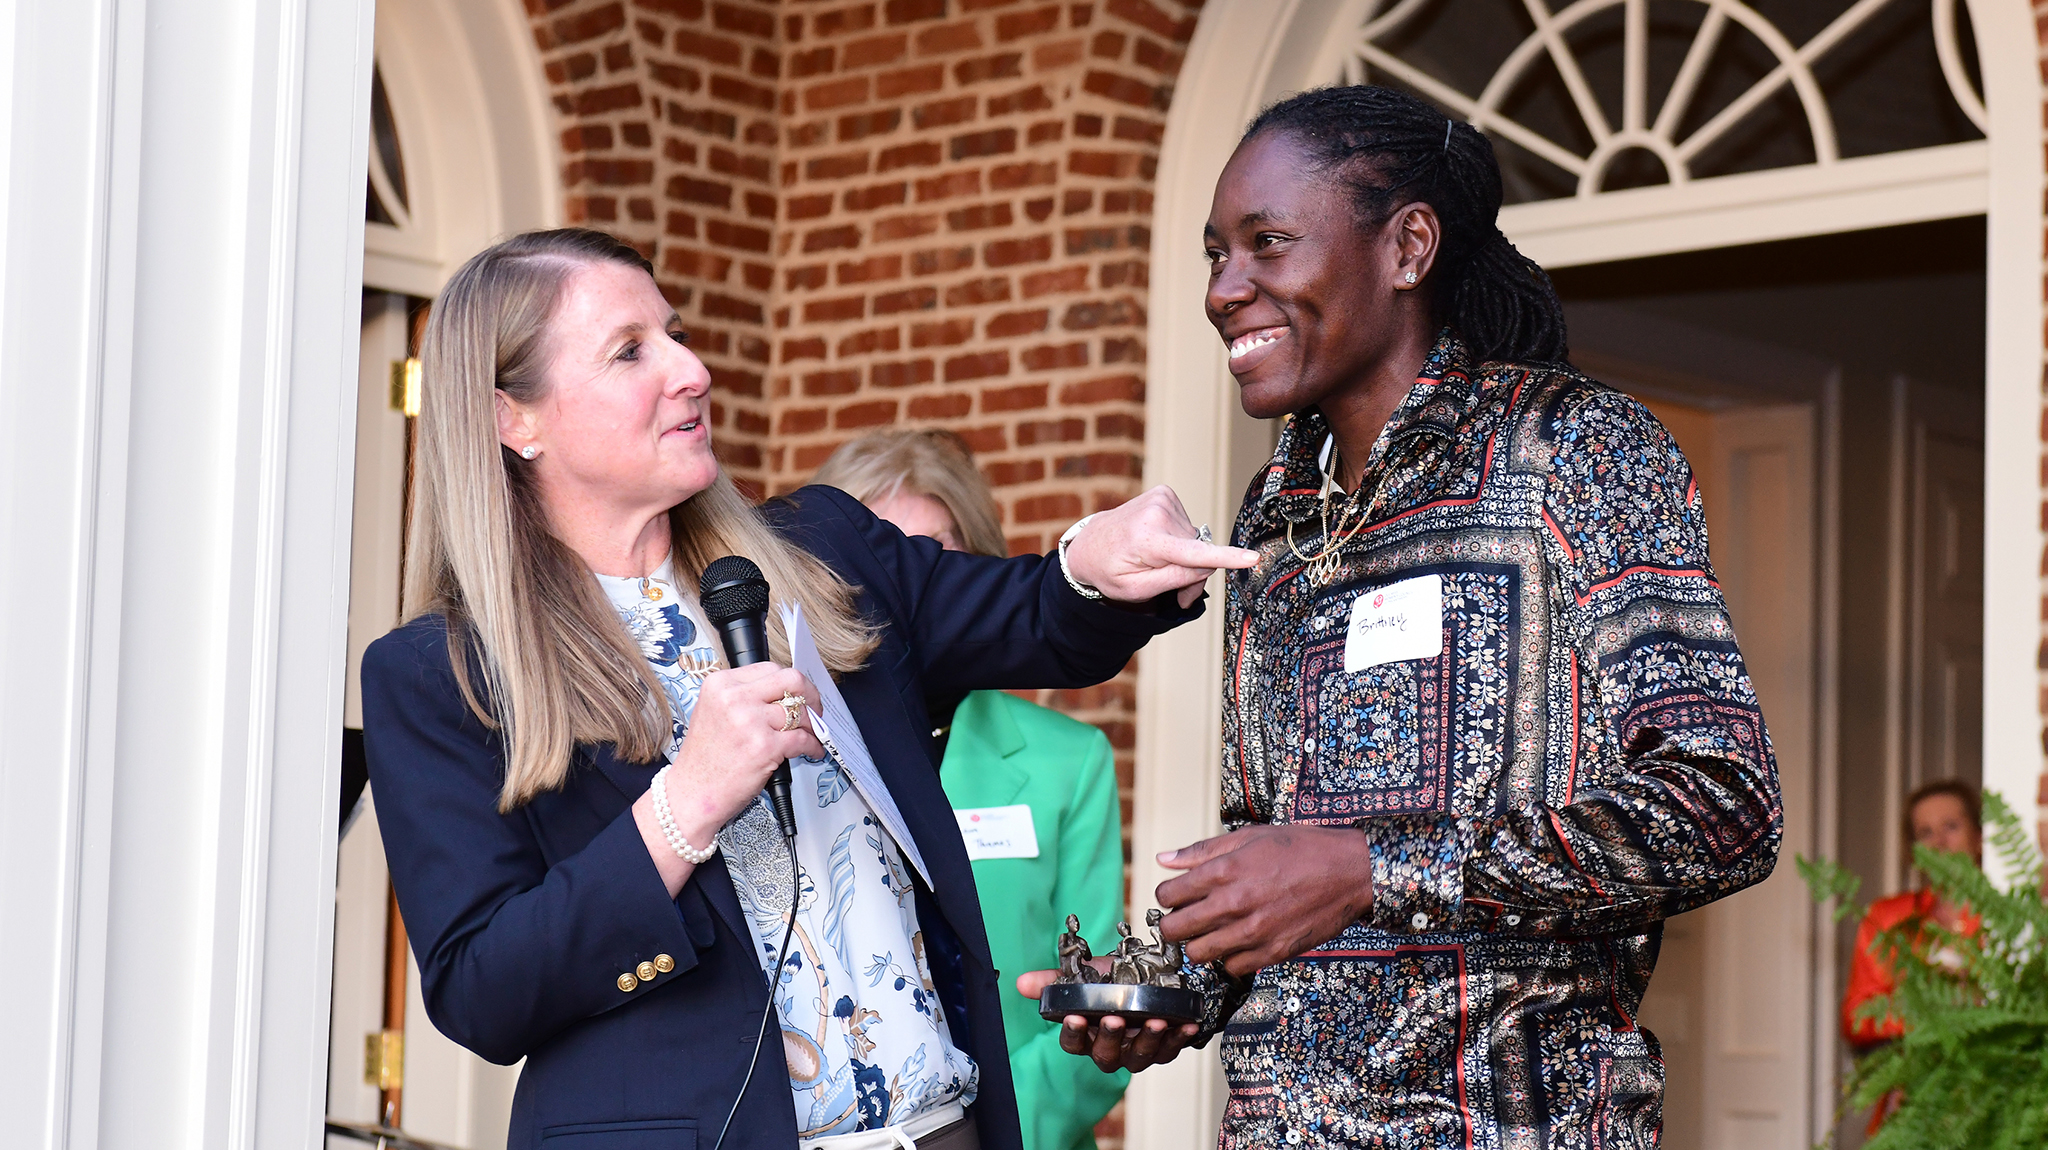 Elizabeth Randall (left), immediate past chair of the Ole Miss Women’s Council for Philanthropy, presents the council’s Emerging Young Philanthropist Award to Brittney Reese, UM alumna and celebrated Olympic long jumper. Photo by Joey Brent